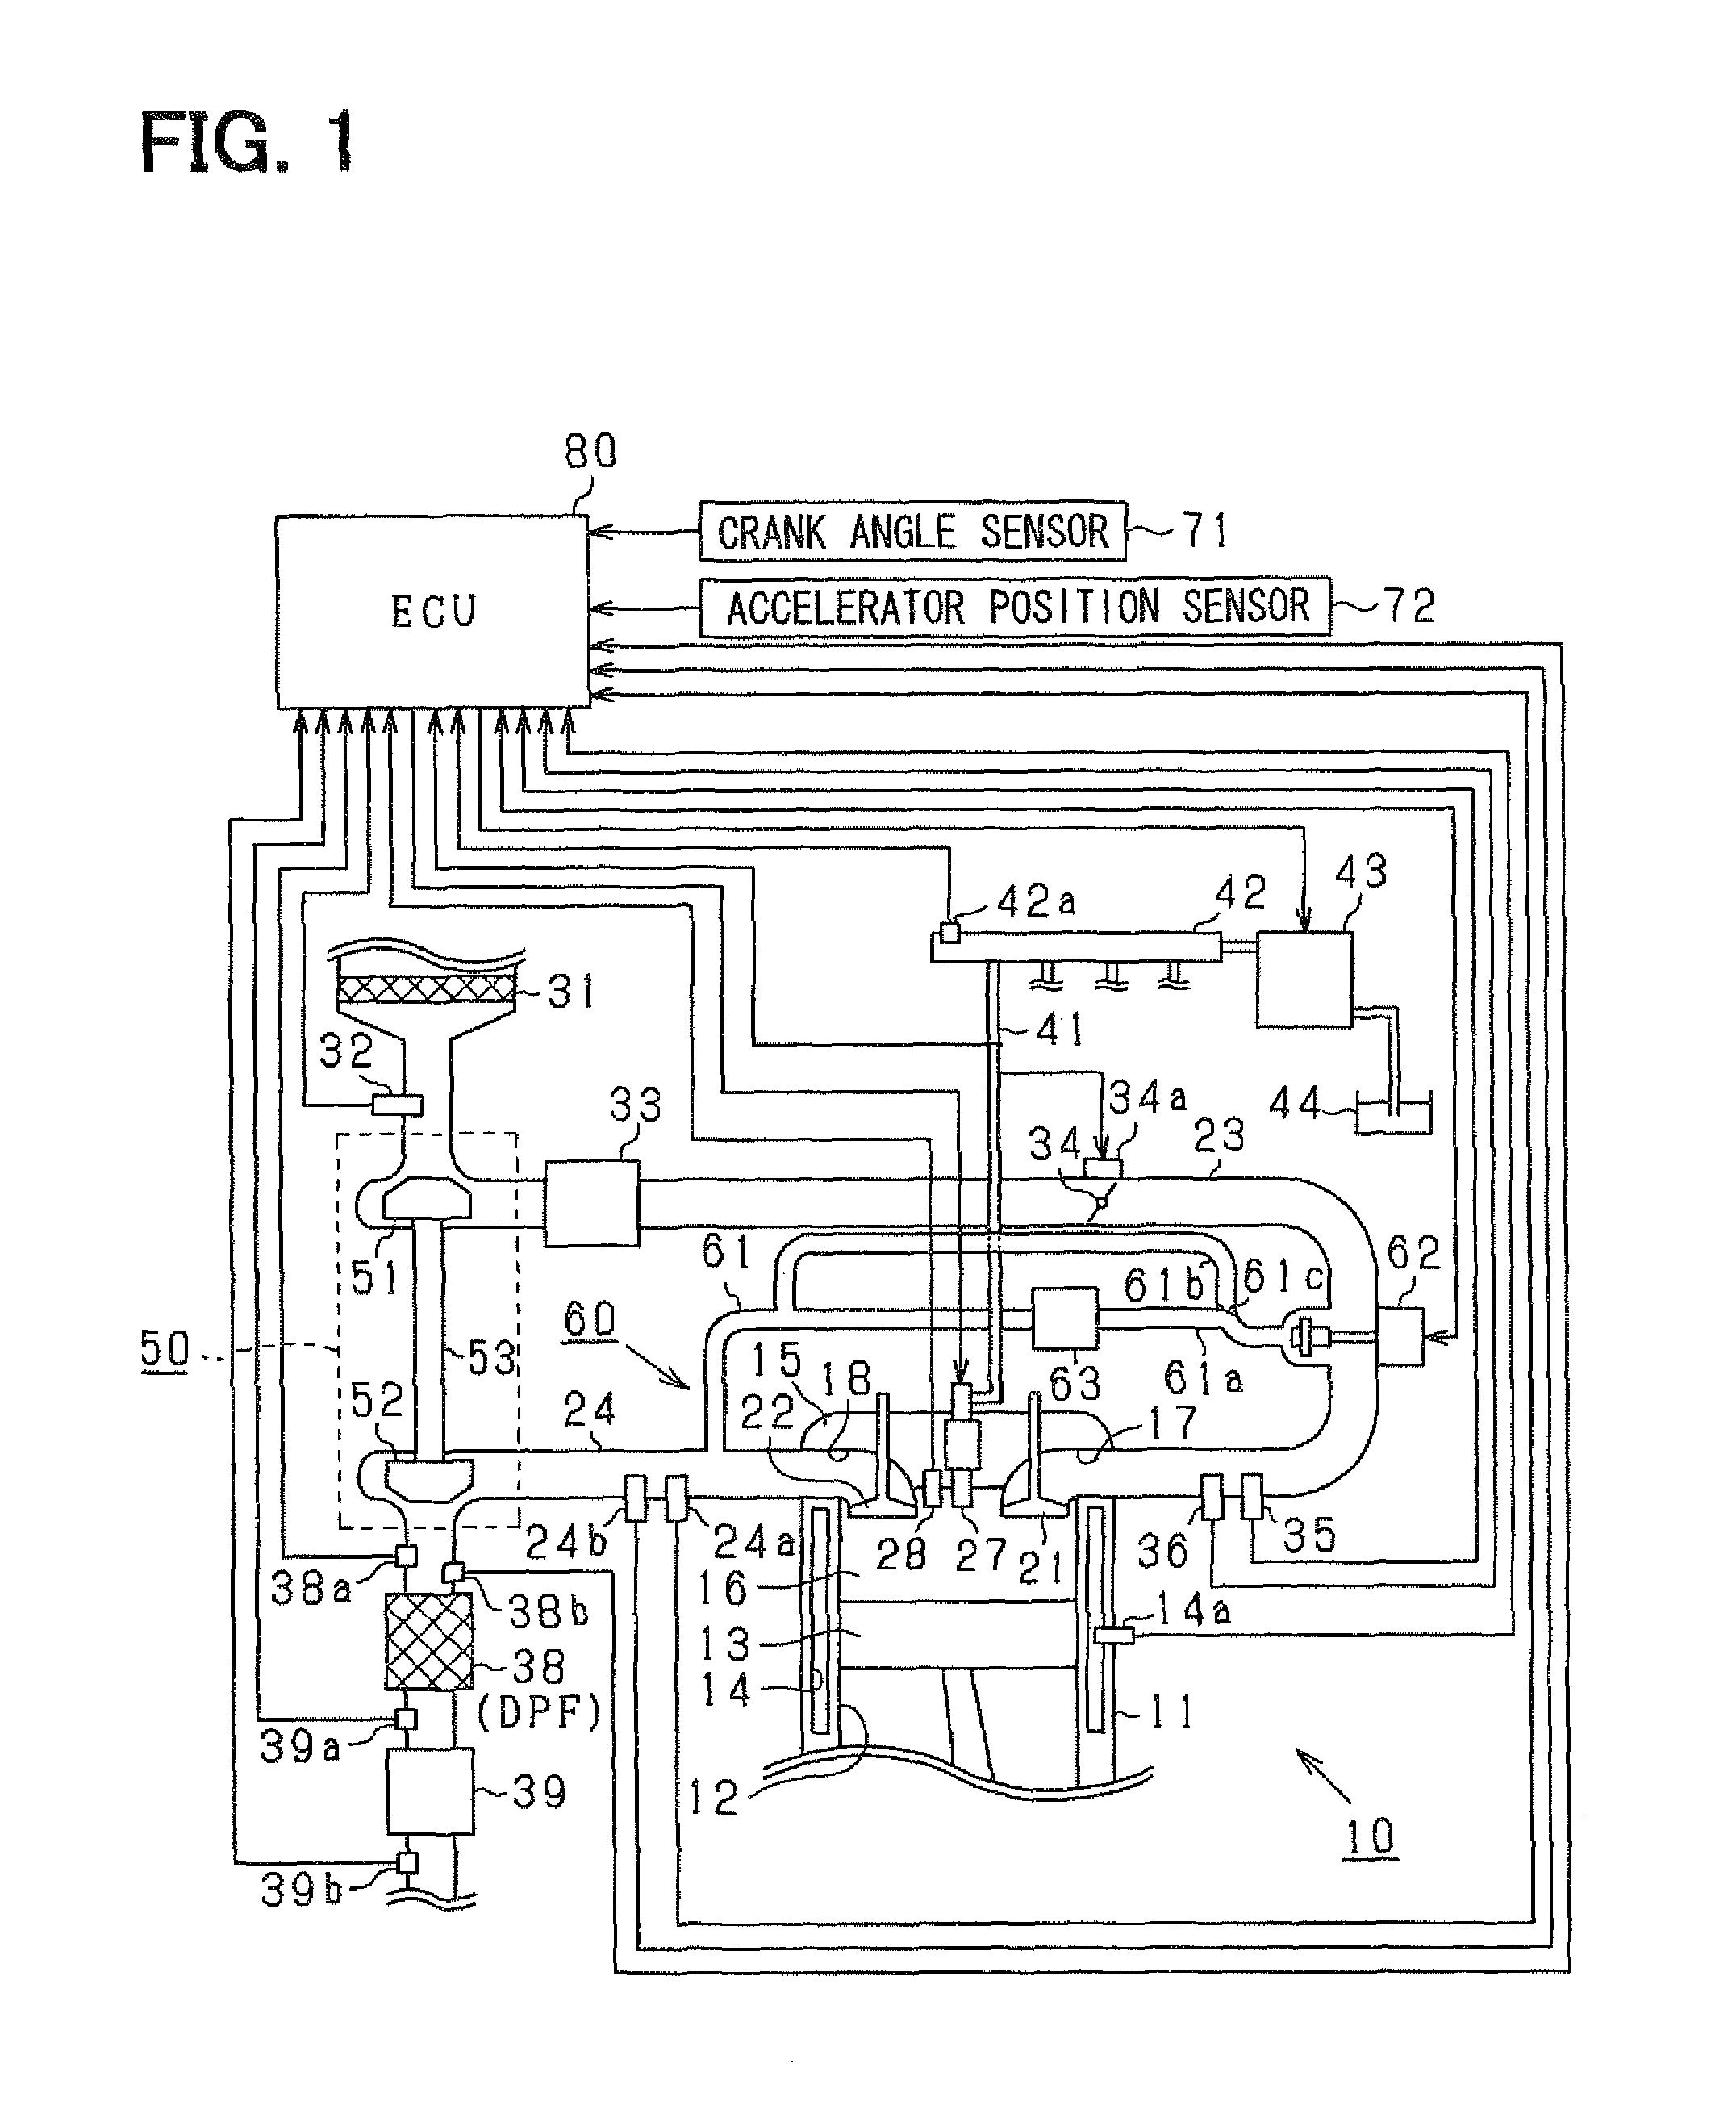 Combustion controller for compression-ignition direct-injection engine and engine control system for the same